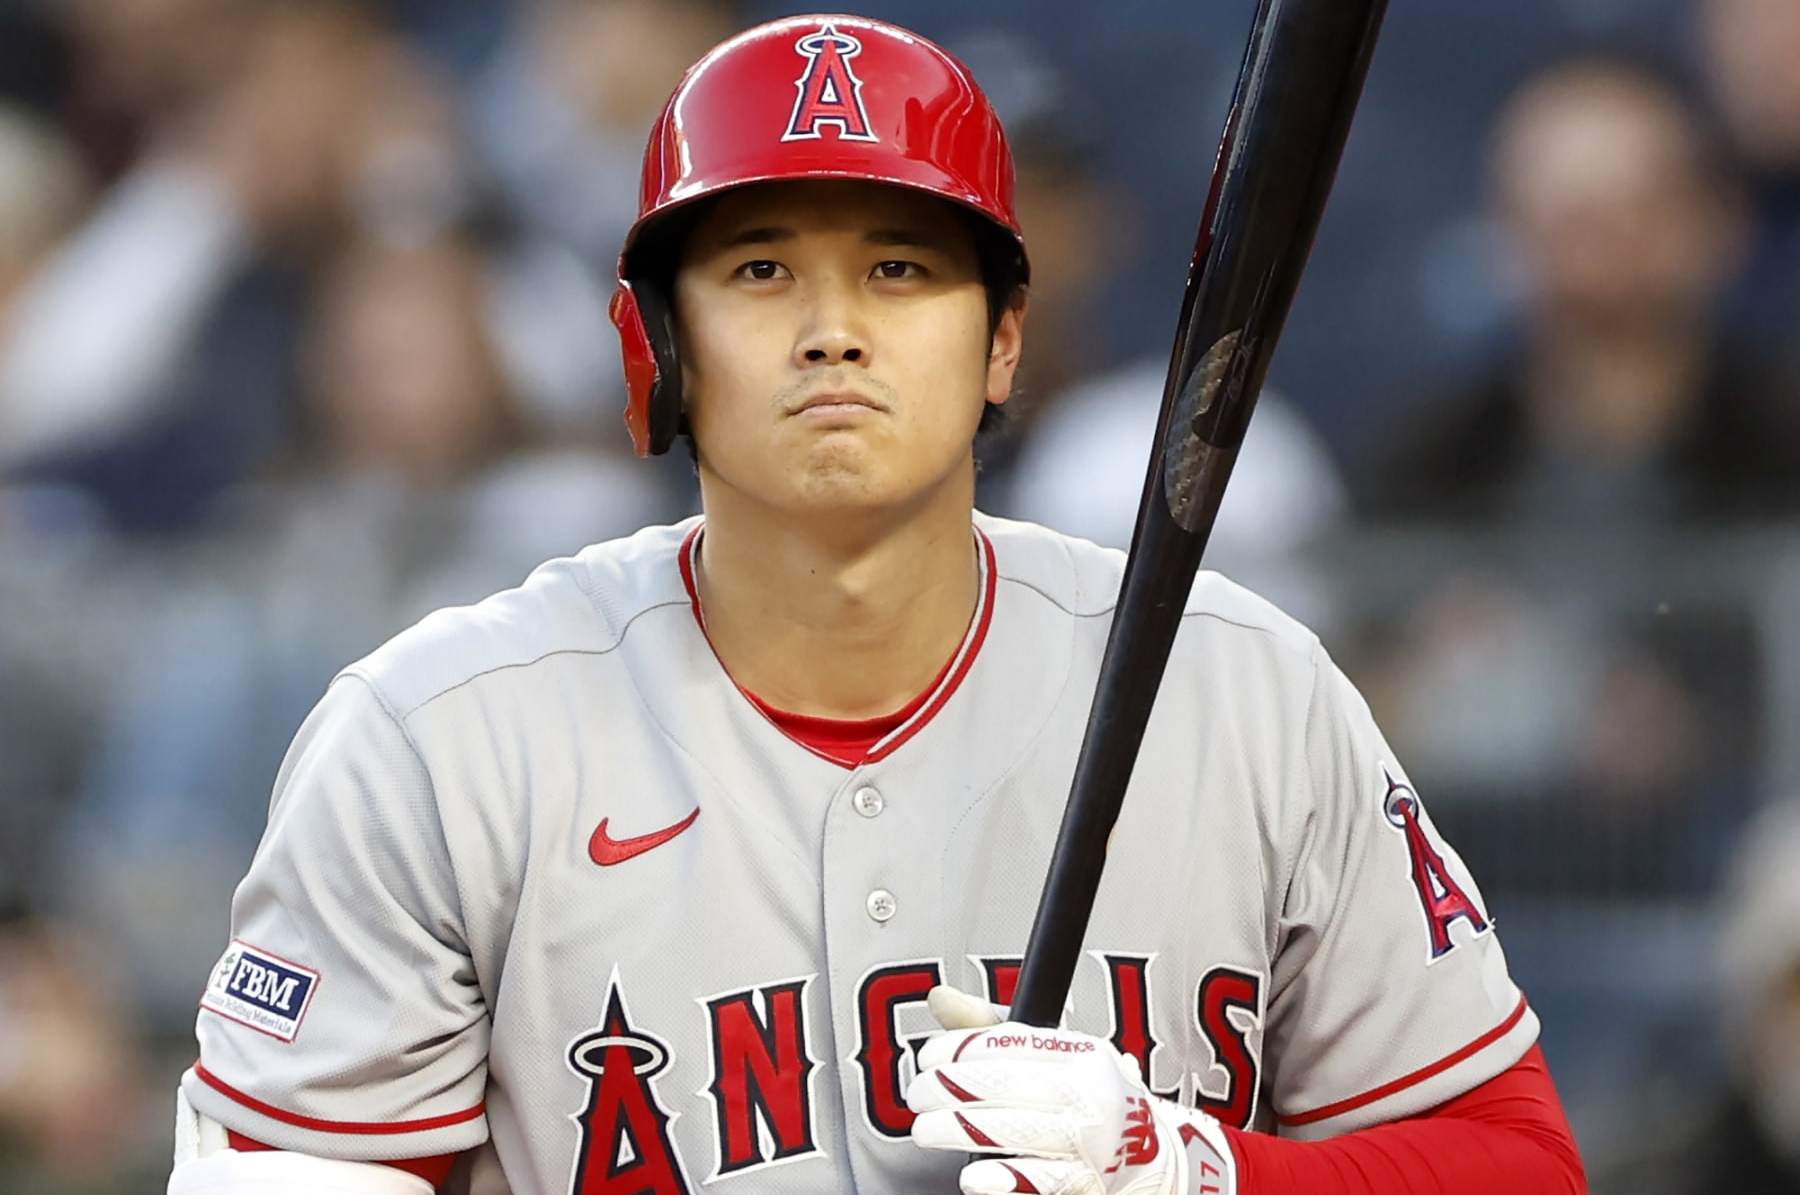 Shohei Ohtani may be traded, will “definitely” leave the Angels if Los Angeles struggles